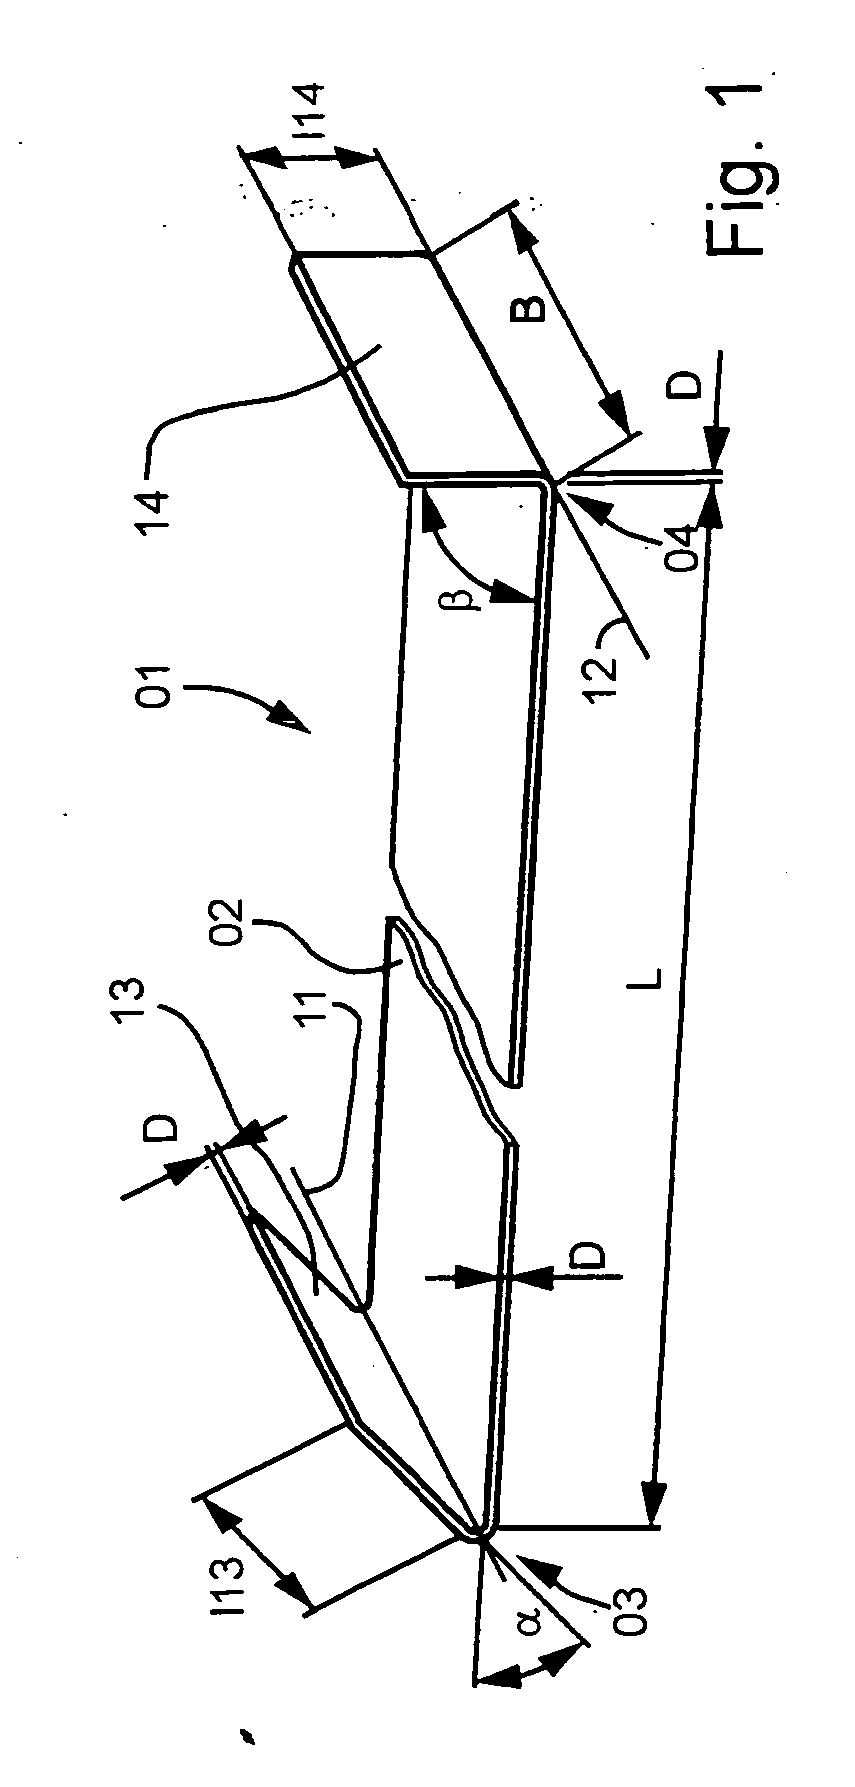 Transport system for providing printing forms to a printing press